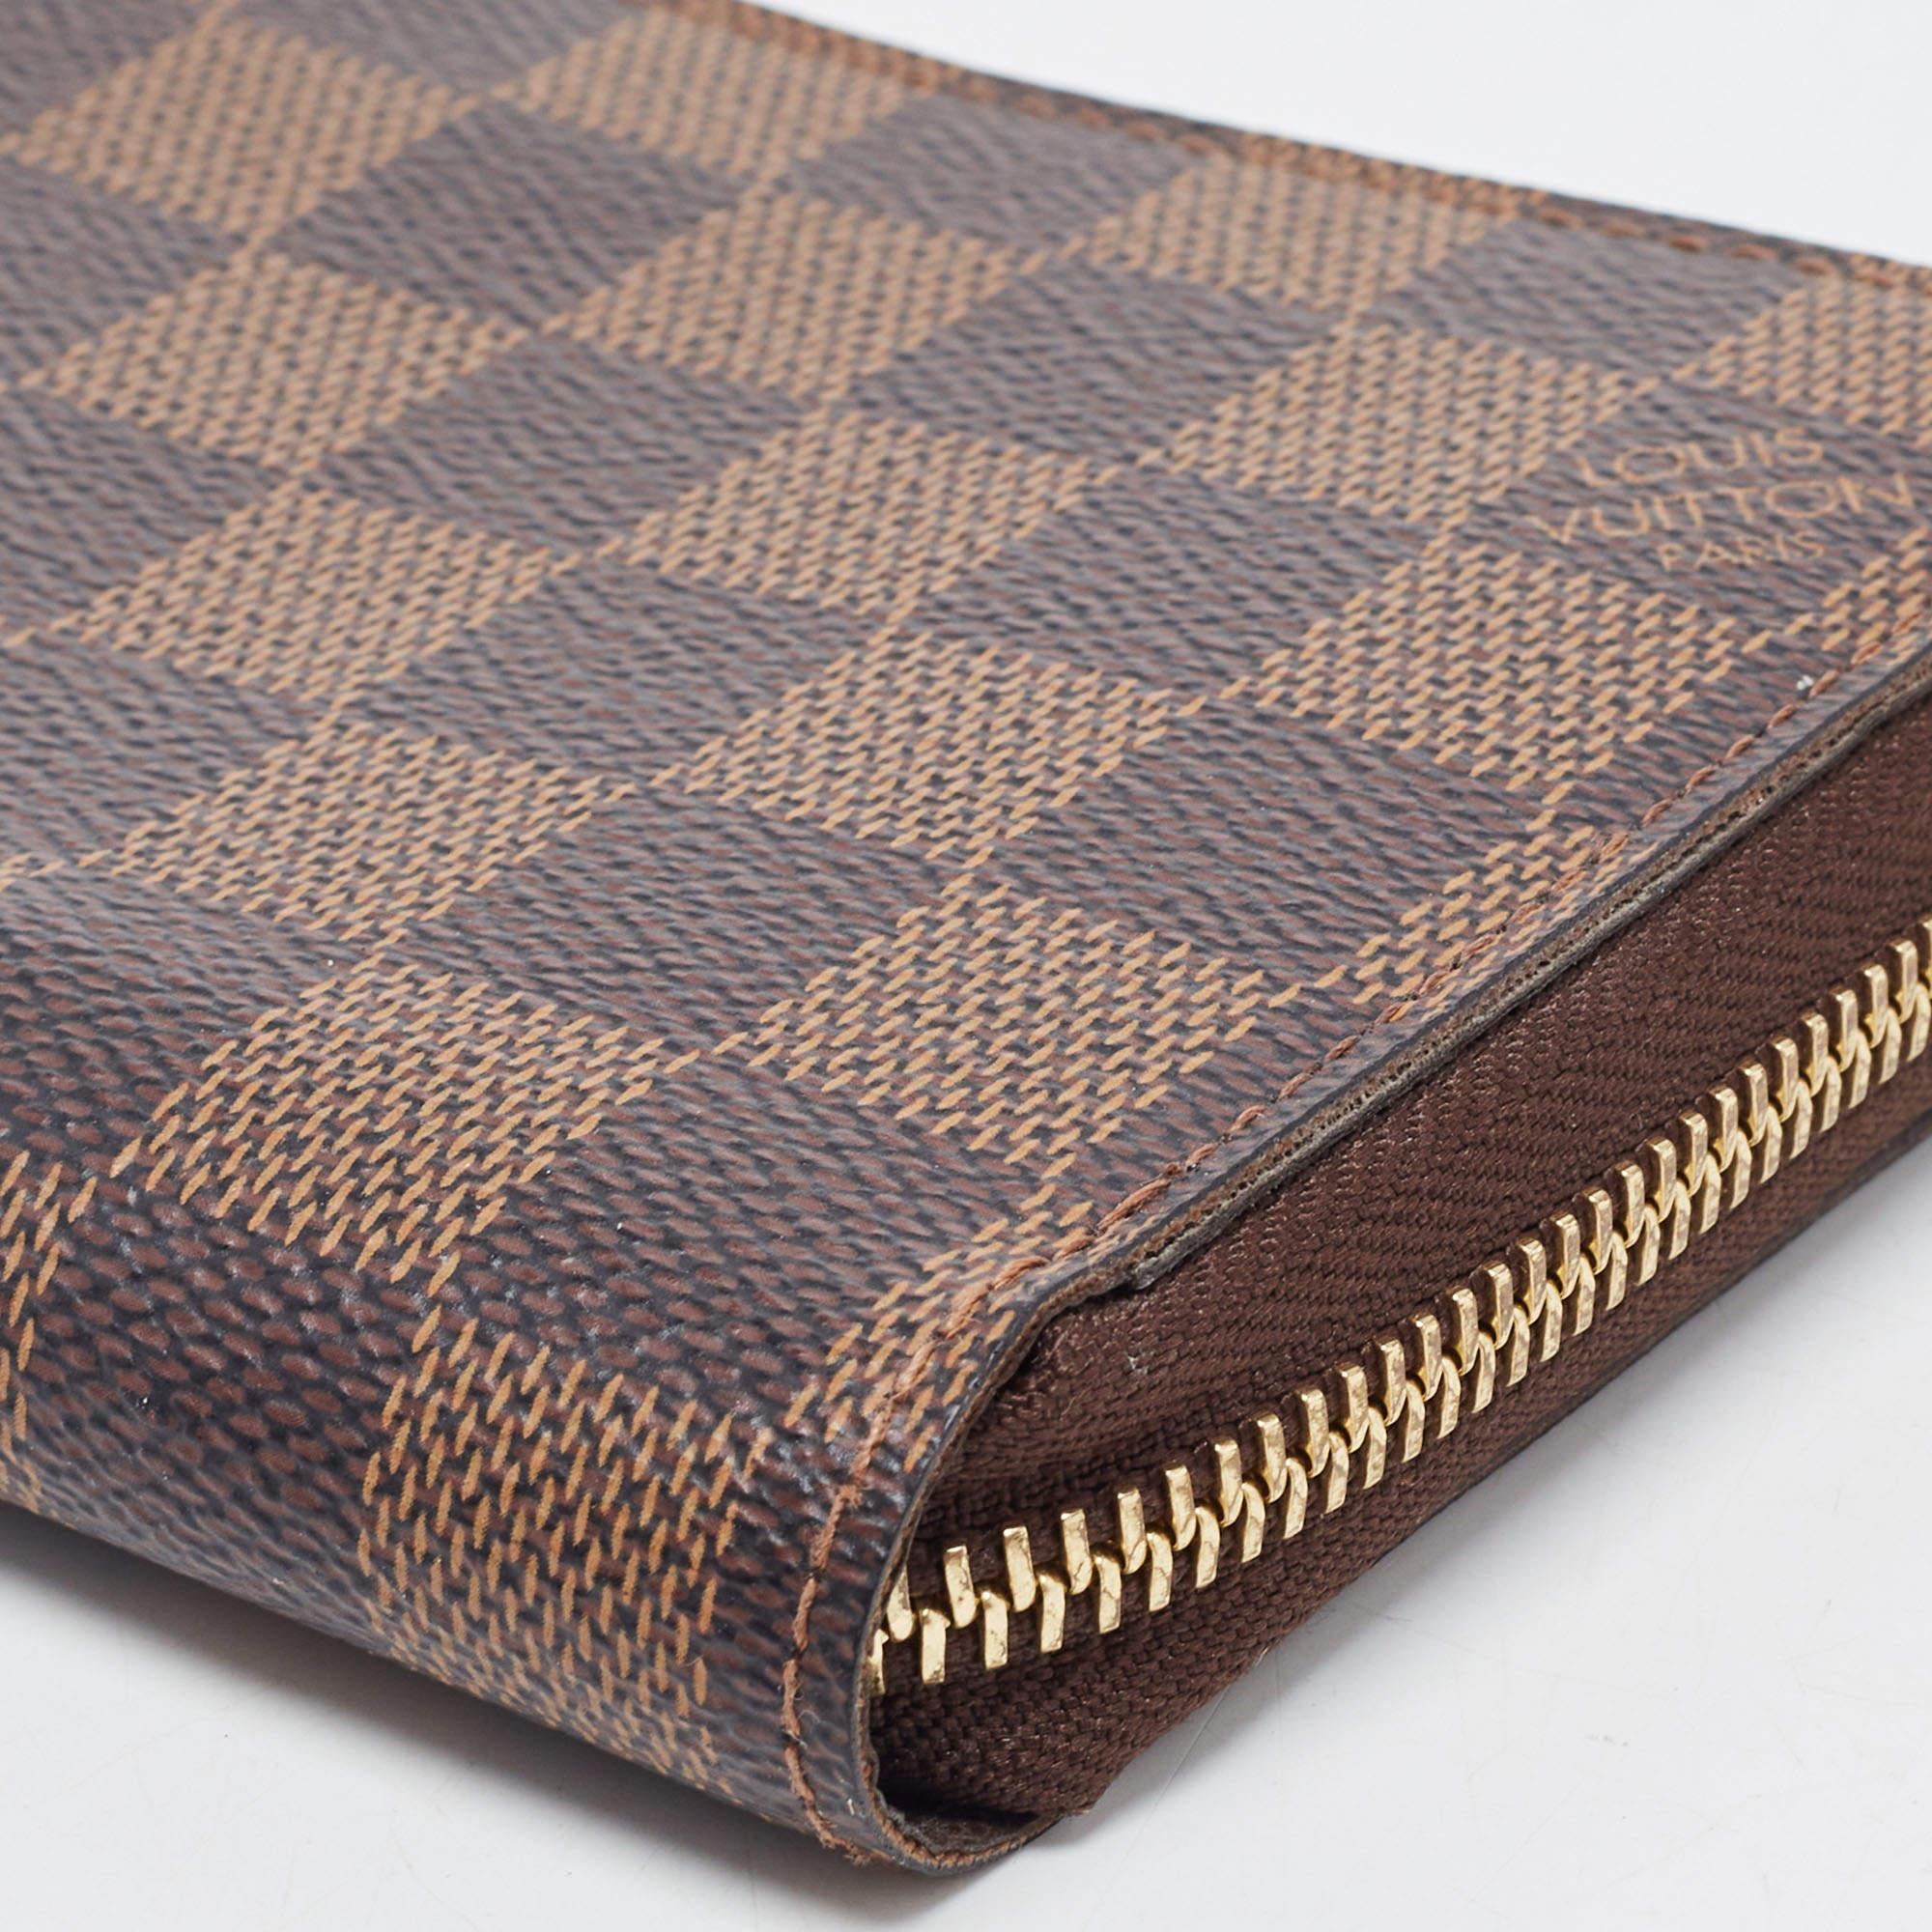 A beautiful wallet for stylish women, this Louis Vuitton wallet is perfect to be carried solo or inside your tote while you step out to run errands. It is a durable accessory.

